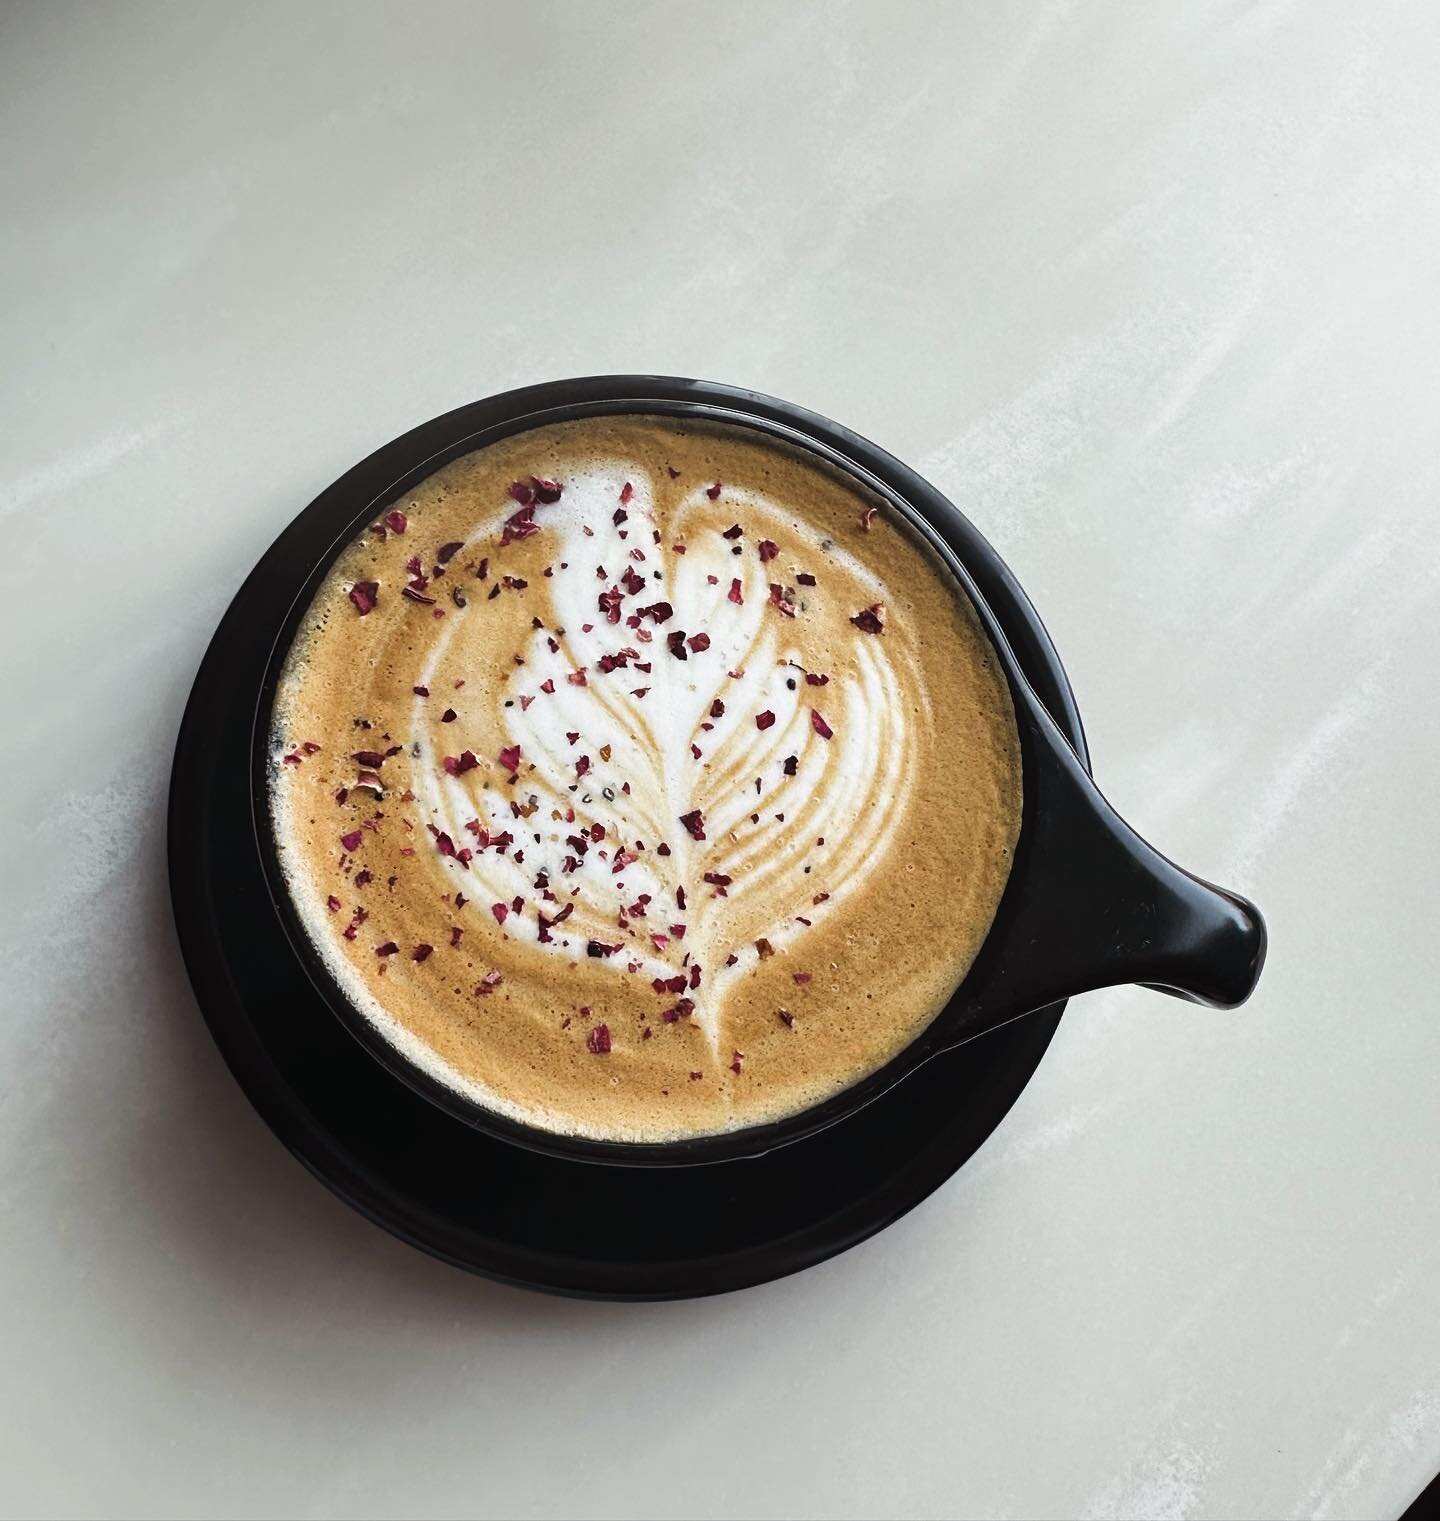 @stillvibrato espresso 🤝 Organic whole milk 🤝 @metoliustea lavender syrup + rose cardamom sprinkle 🫶🏼 Available every day from 7am-4pm. *oat milk available for dairy substitute